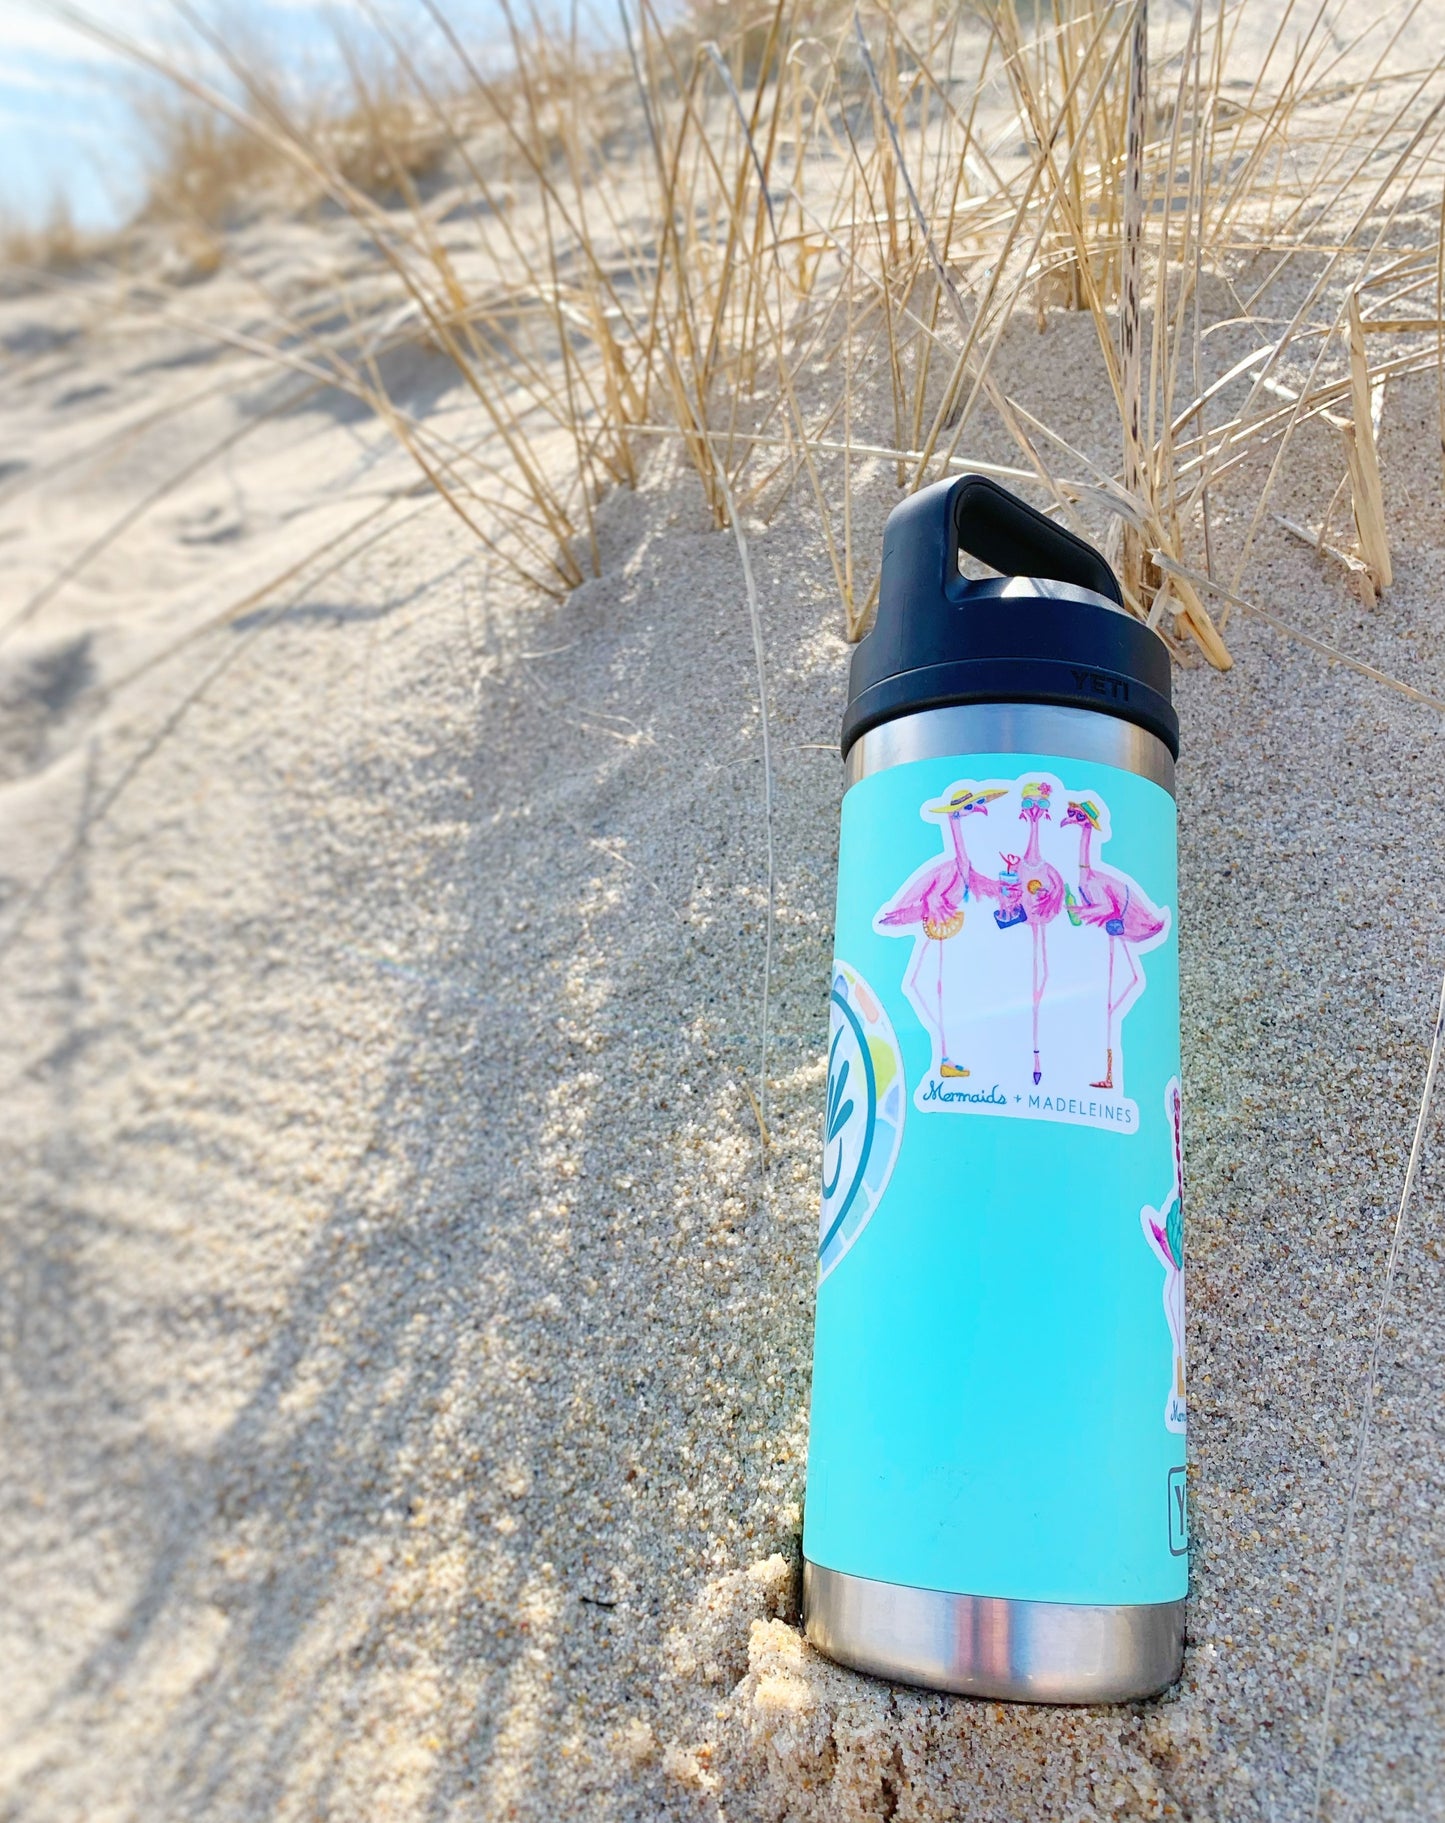 The flamingal sticker is created from original artwork made with acrylic paint and marker its 3 flamingo ladies dressed in summer hats and various footwear. This is a picture of a sticker on an aqua color yeti thermos sitting in the sand at the beach